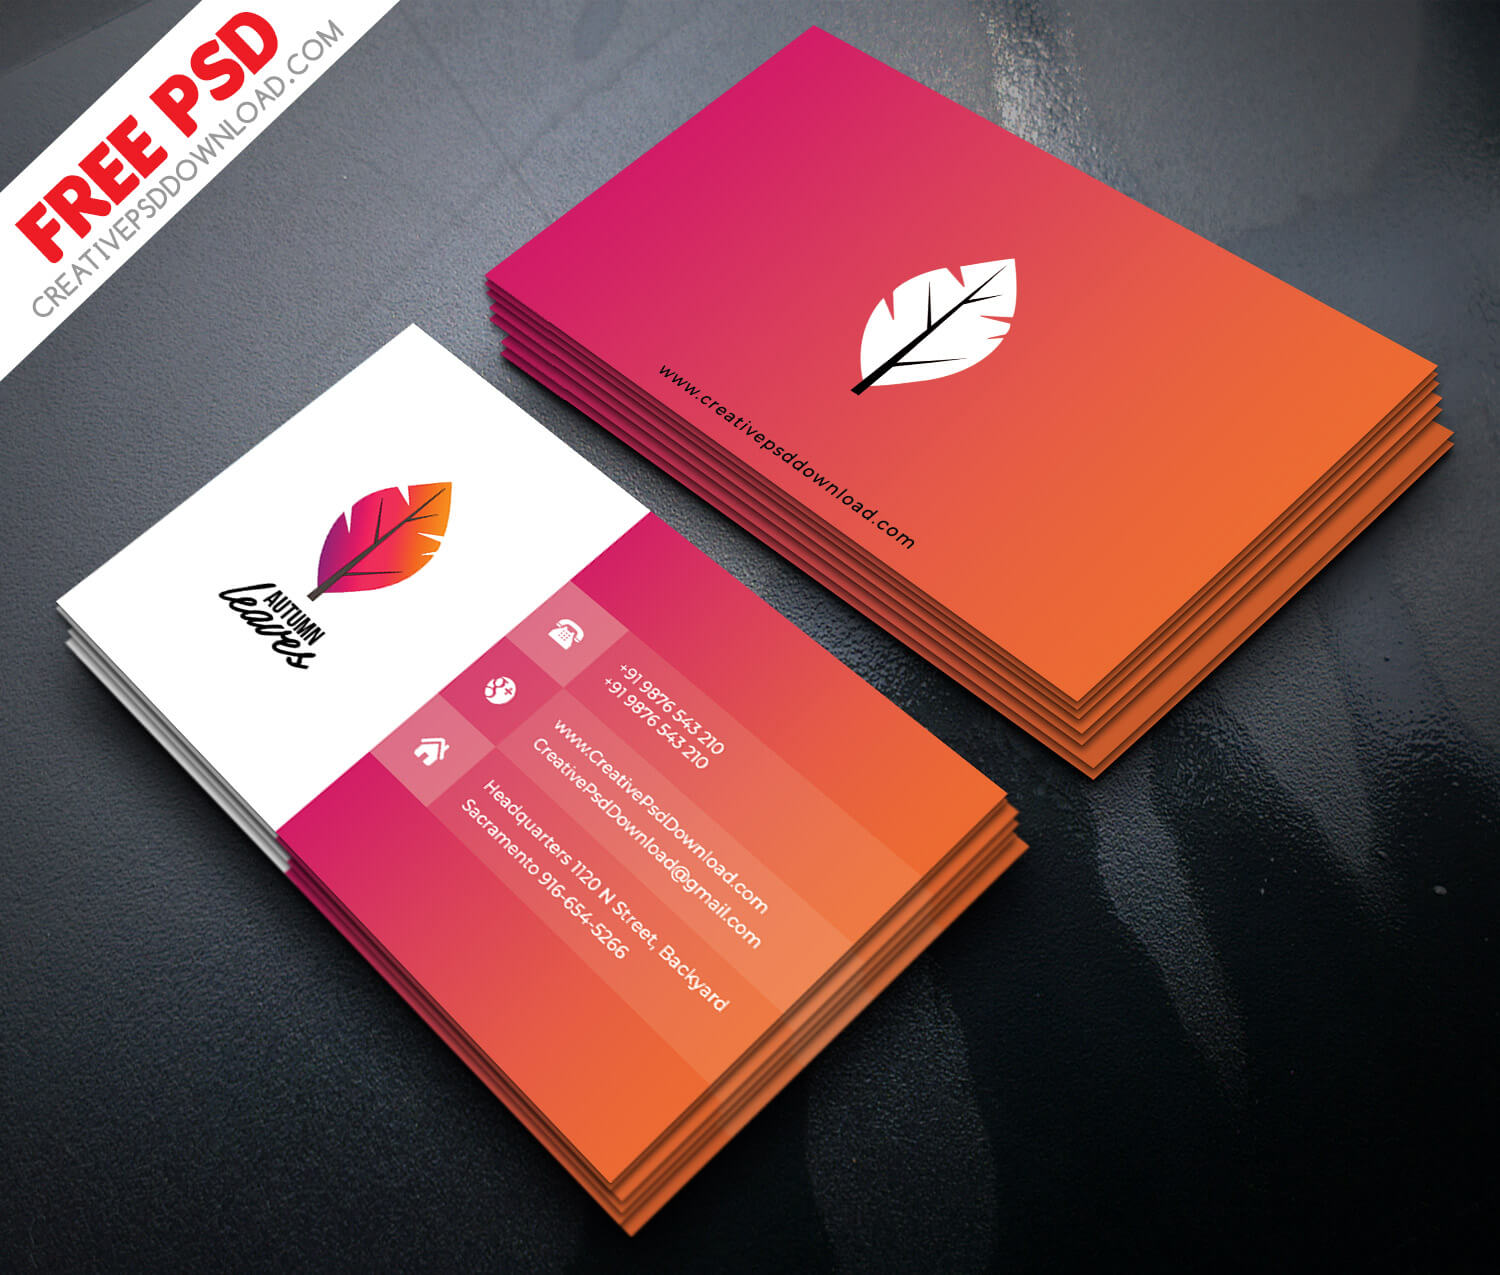 035 Blank Business Card Template Psd Download Ideas Intended For Blank Business Card Template Psd